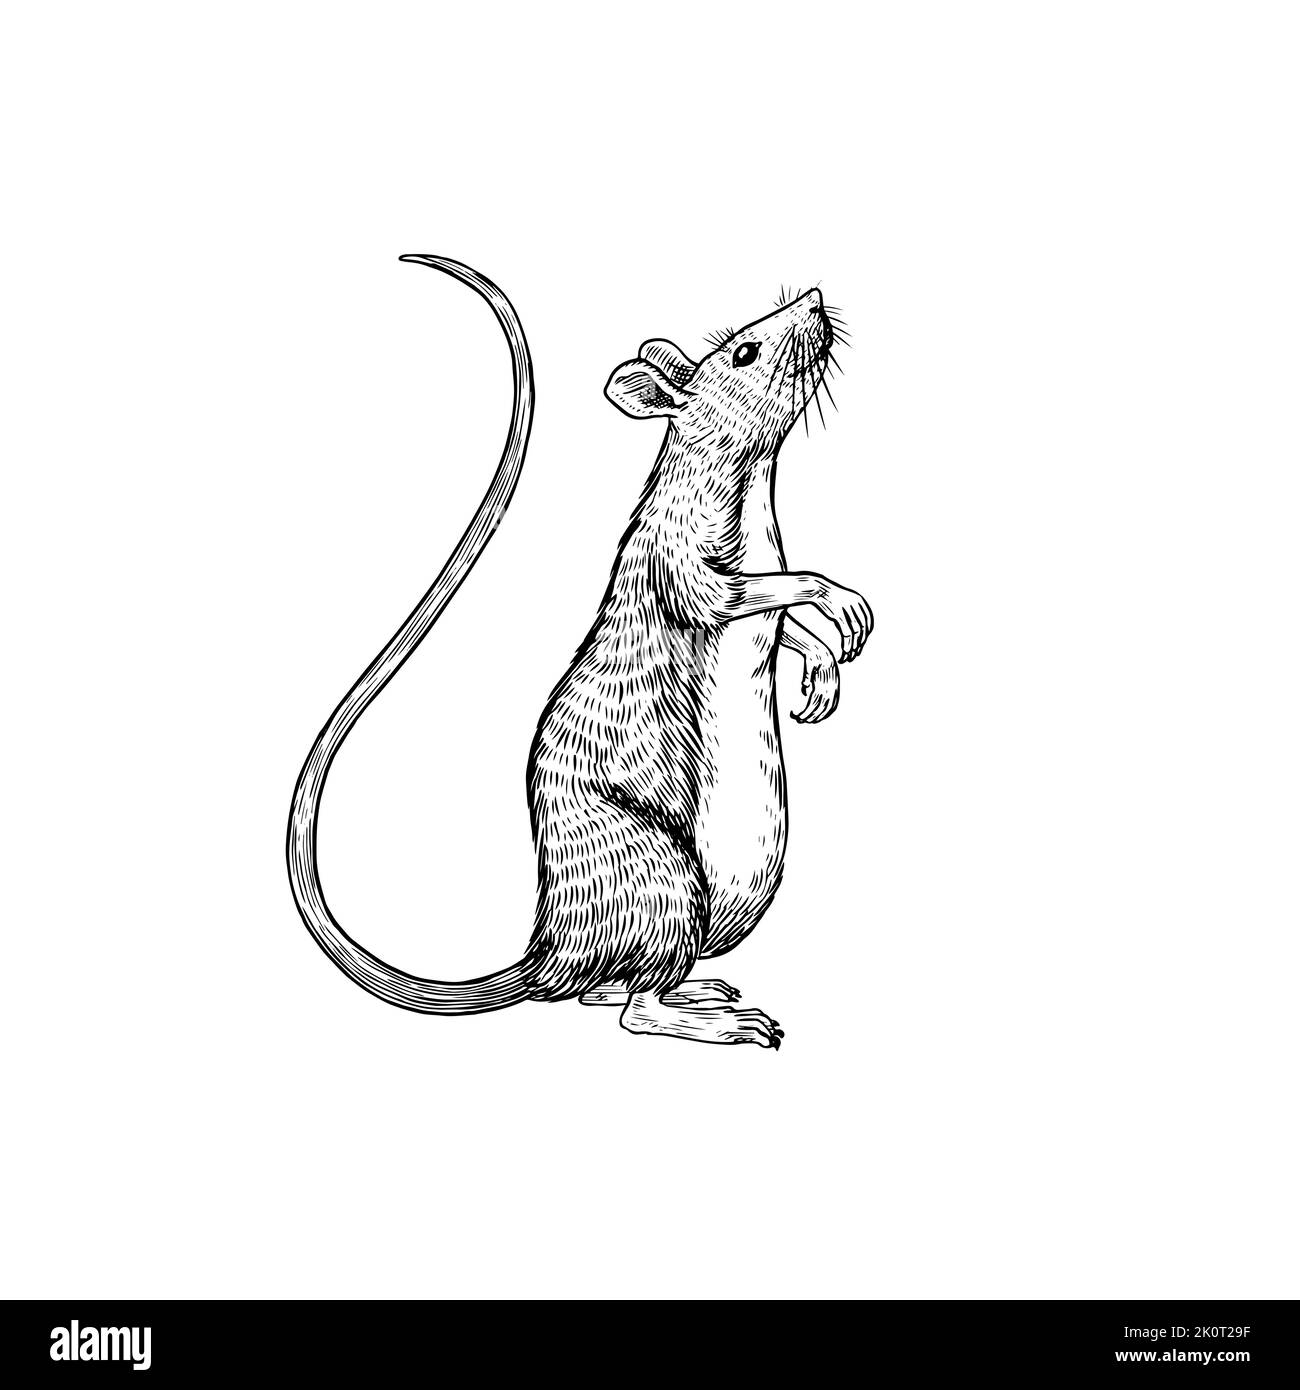 Rat king Black and White Stock Photos & Images - Alamy